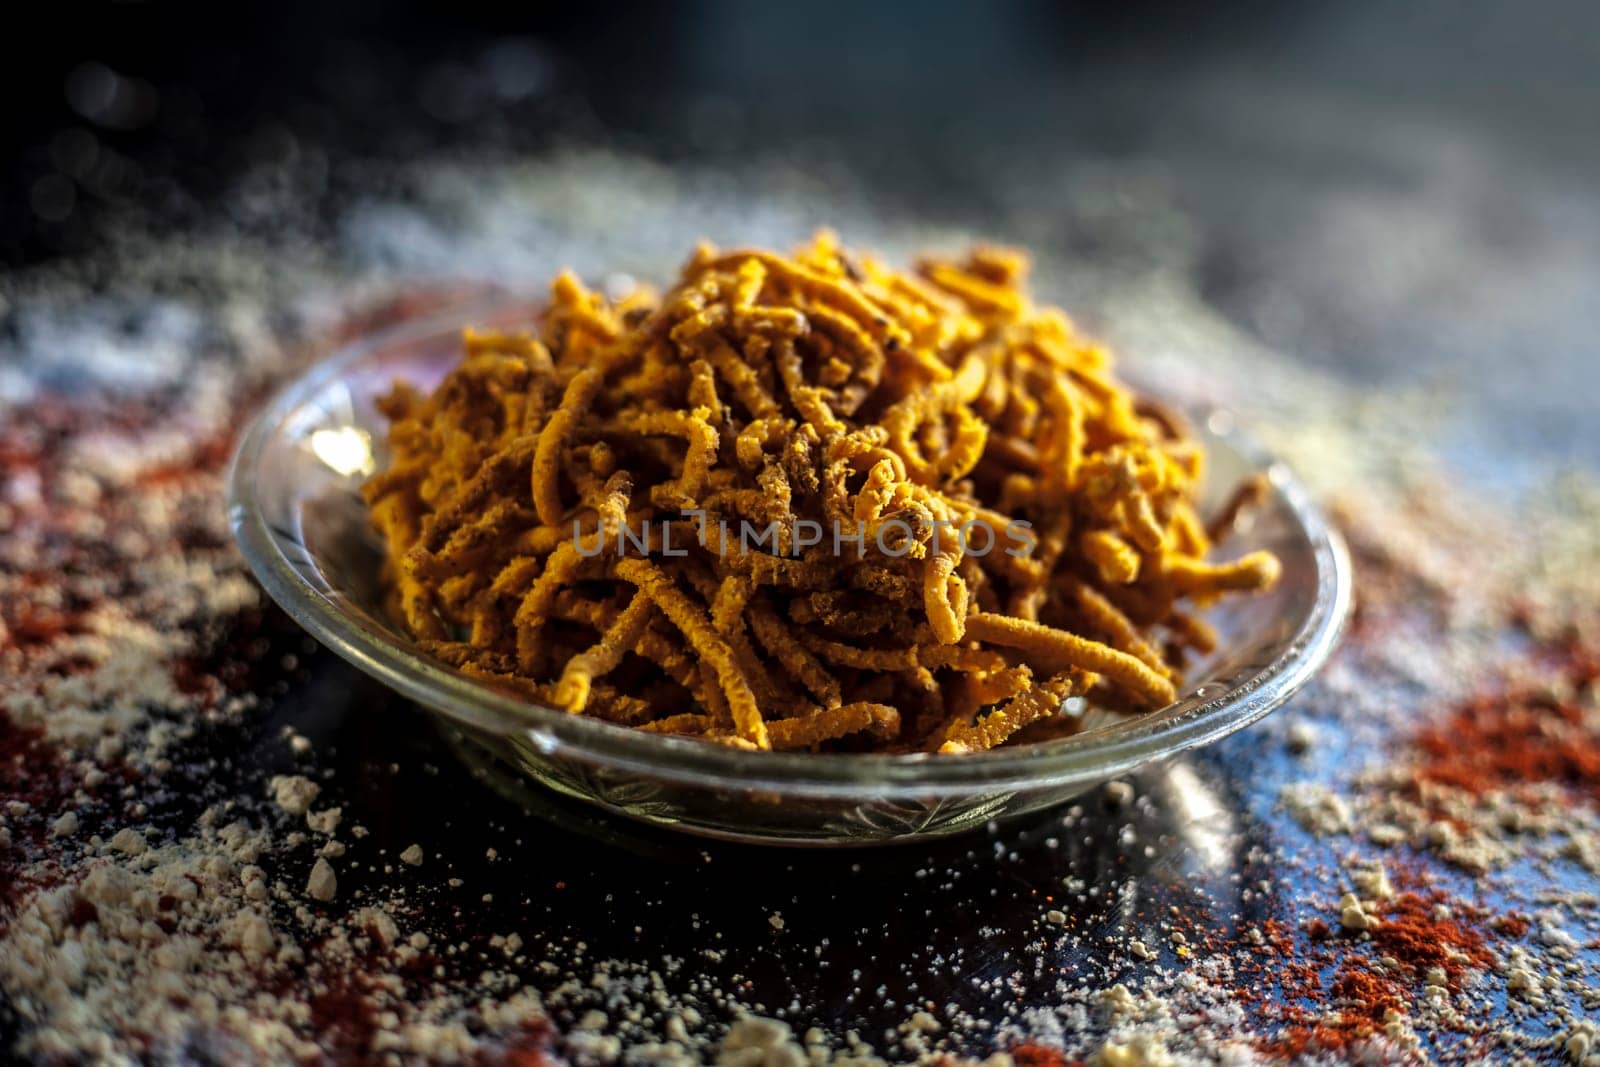 Diwali and Shravan Som special Teekha Gathiya in a glass plate along with some spread chickpea flour, red chili powder, and other ingredients that are needed to make the snack on a black surface. by mirzamlk